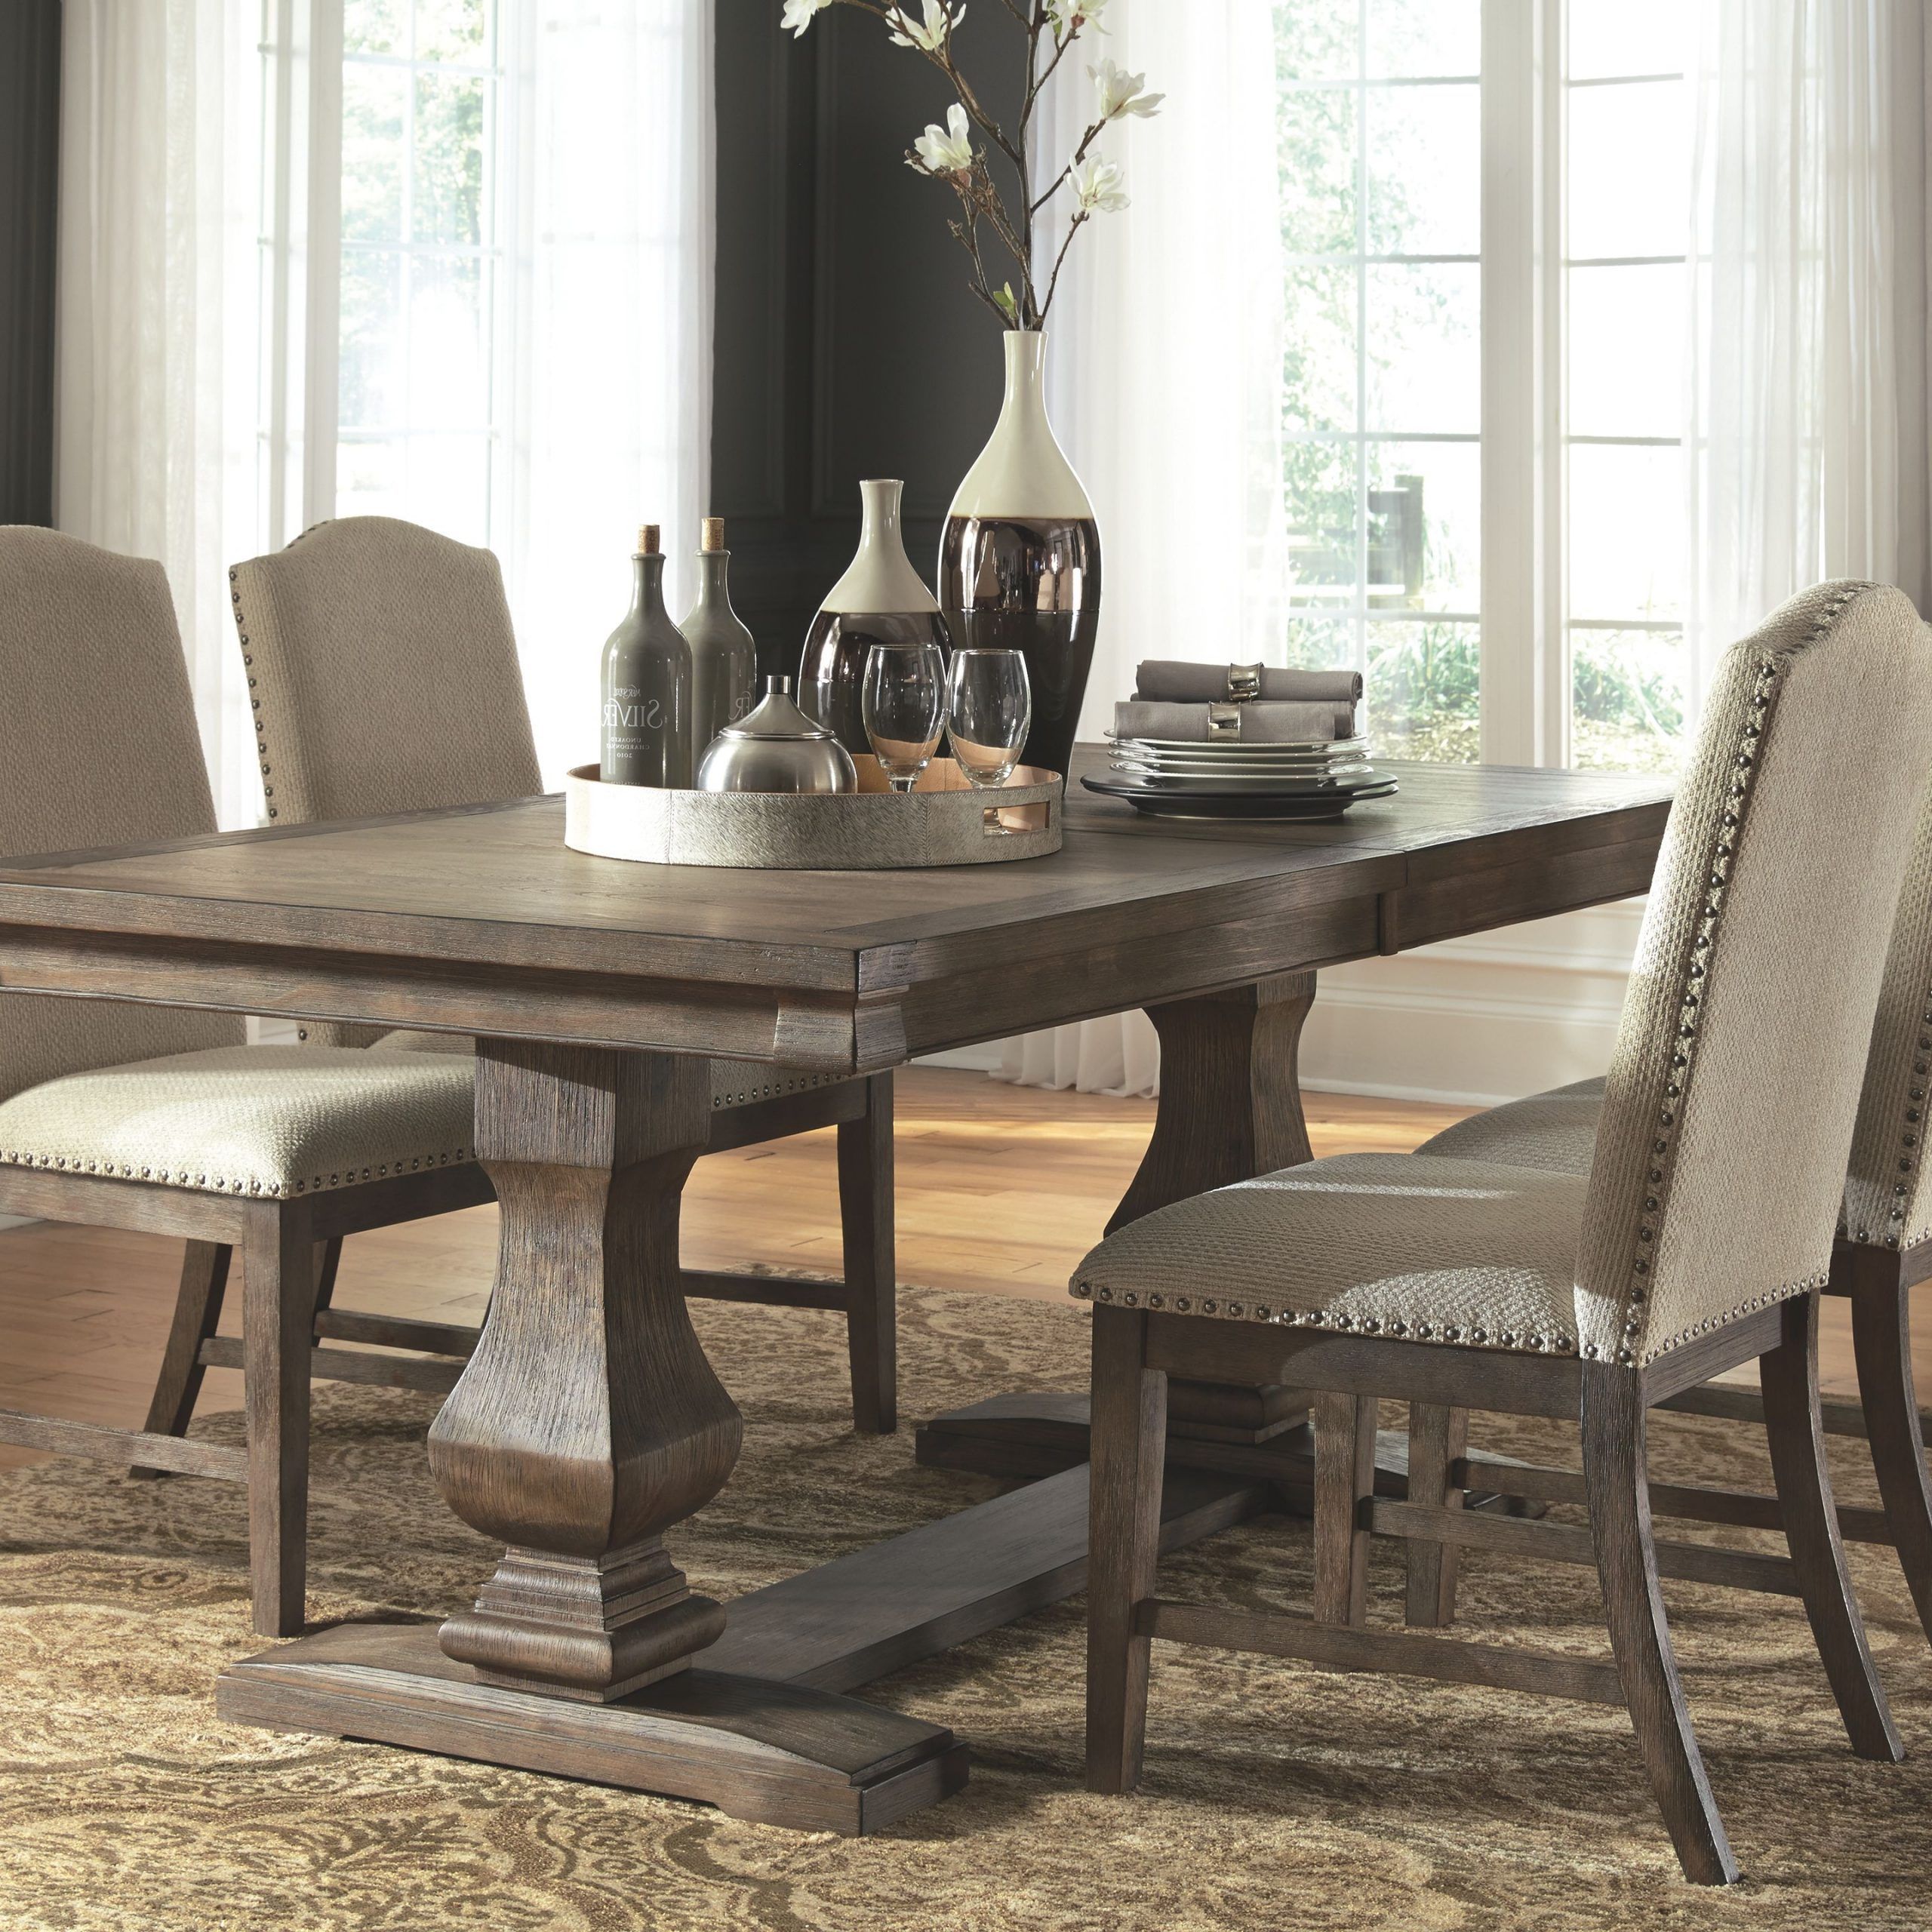 Well Liked Gray Wash Lorraine Extending Dining Tables With Regard To Johnelle 5 Piece Dining Room, Gray In  (View 3 of 25)